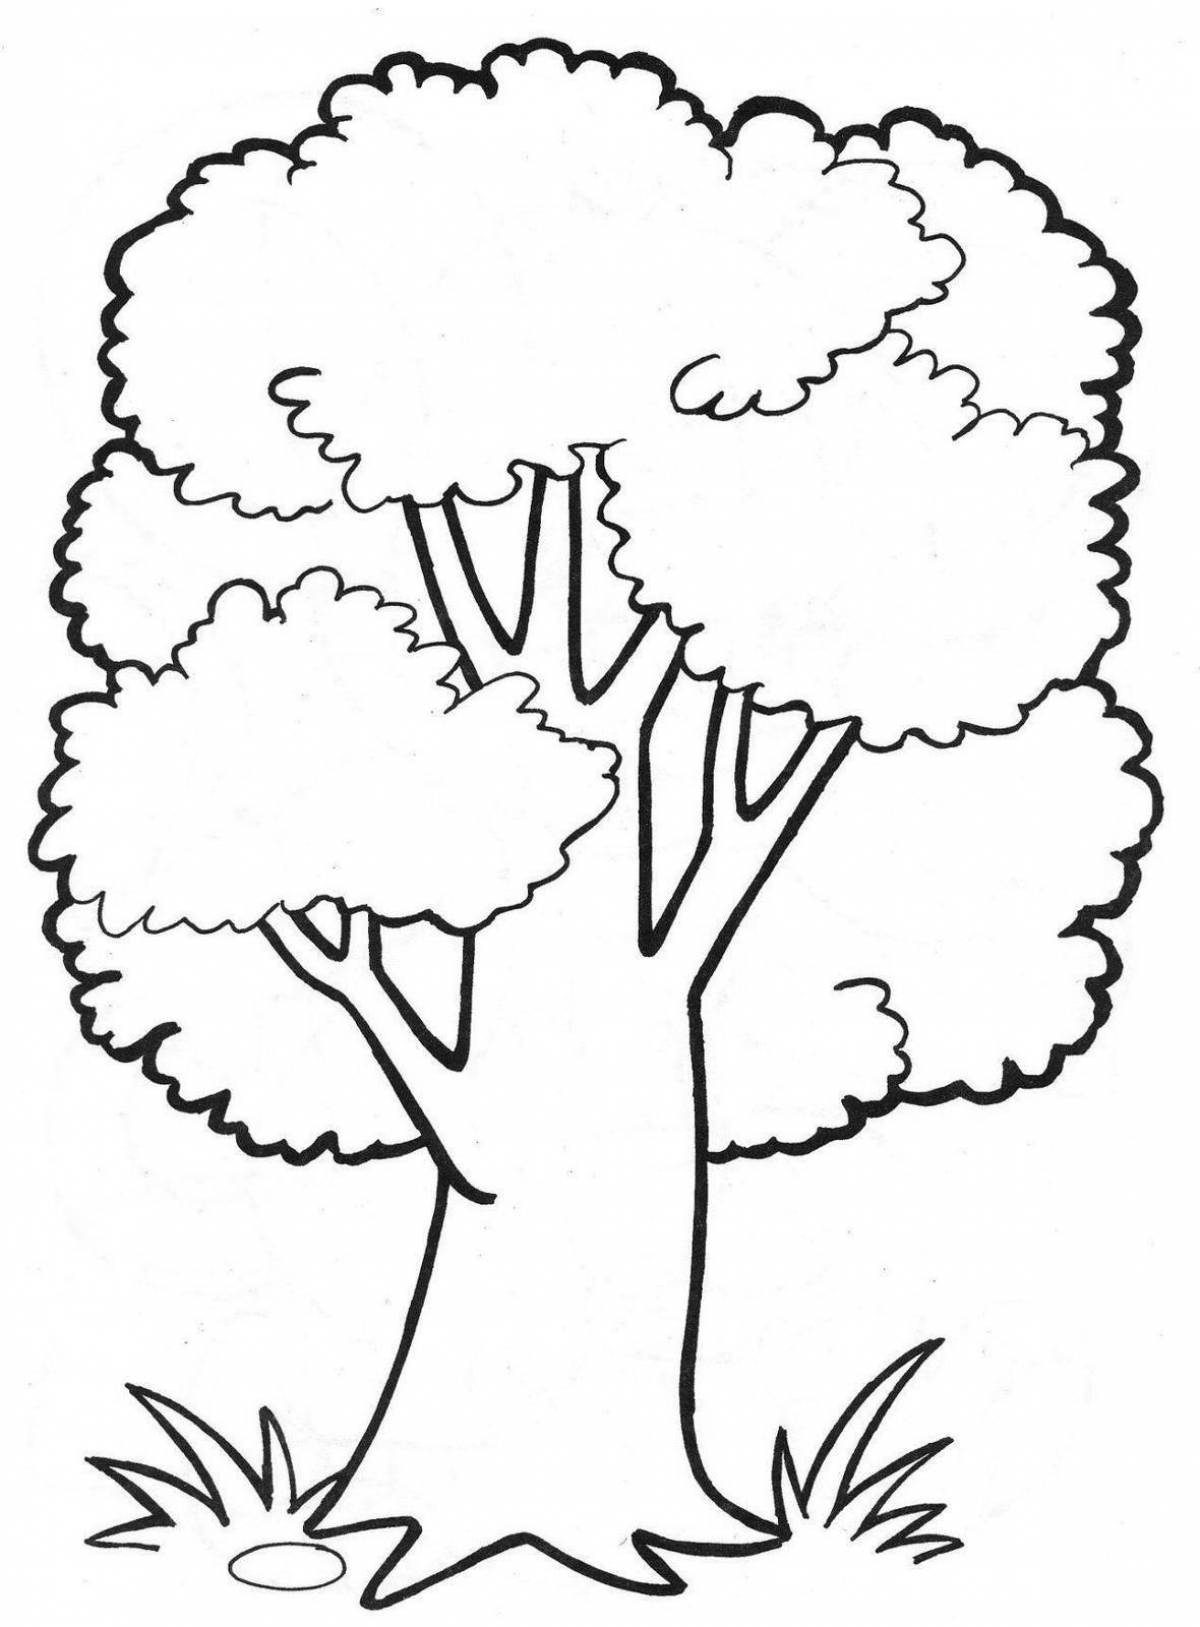 Tree coloring page with unique pattern